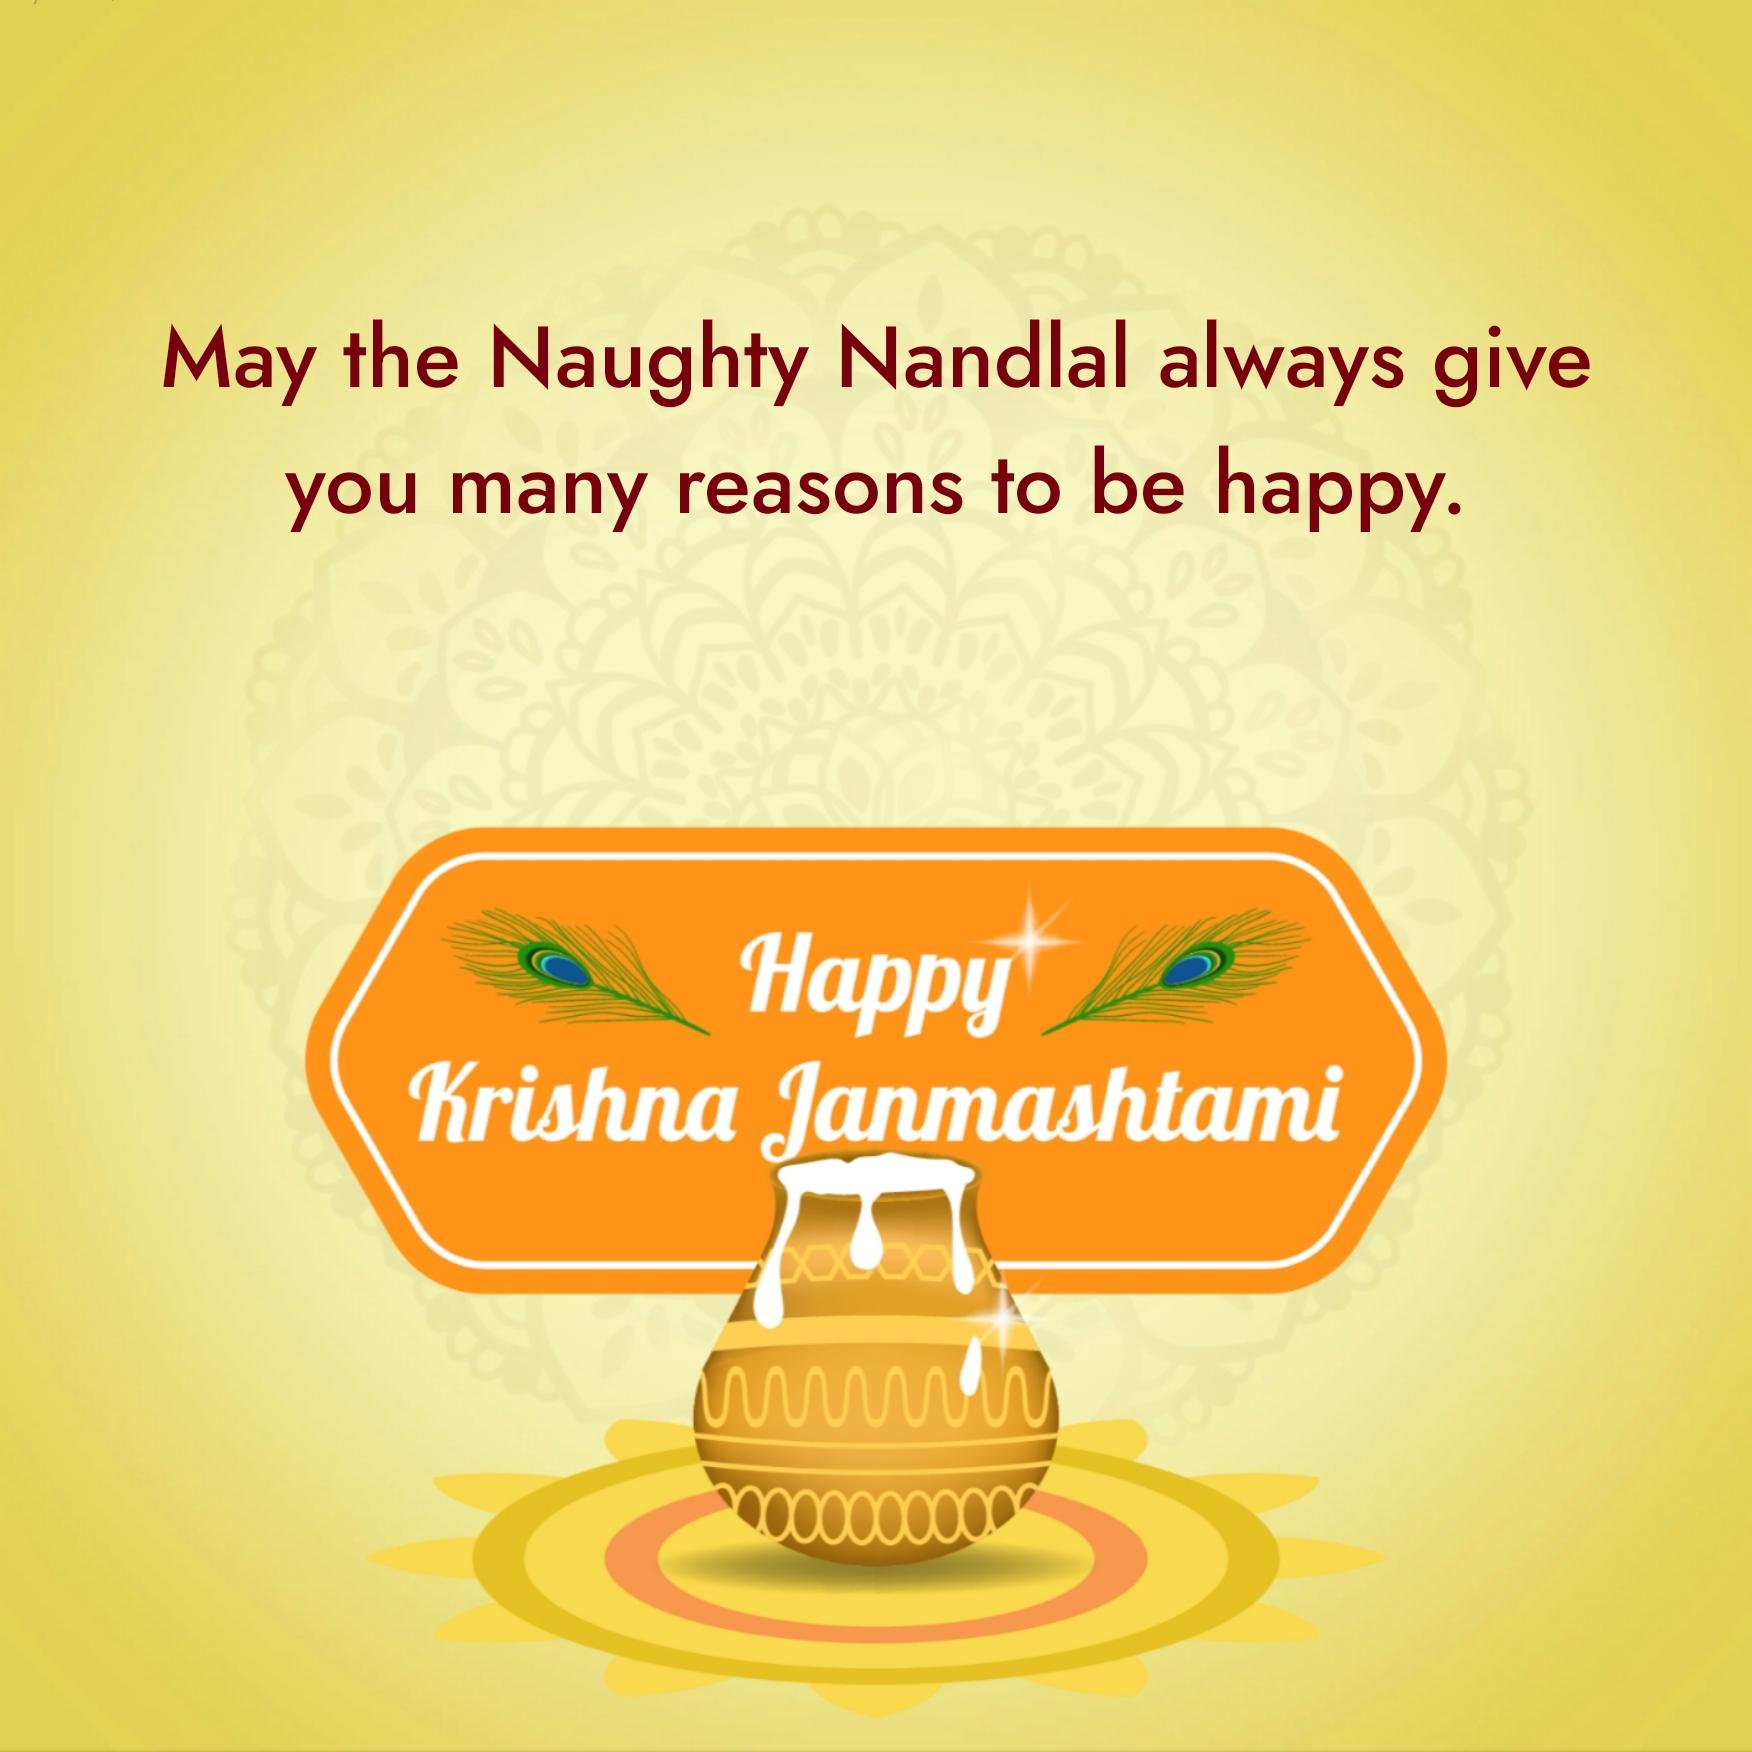 May the Naughty Nandlal always give you many reasons to be happy